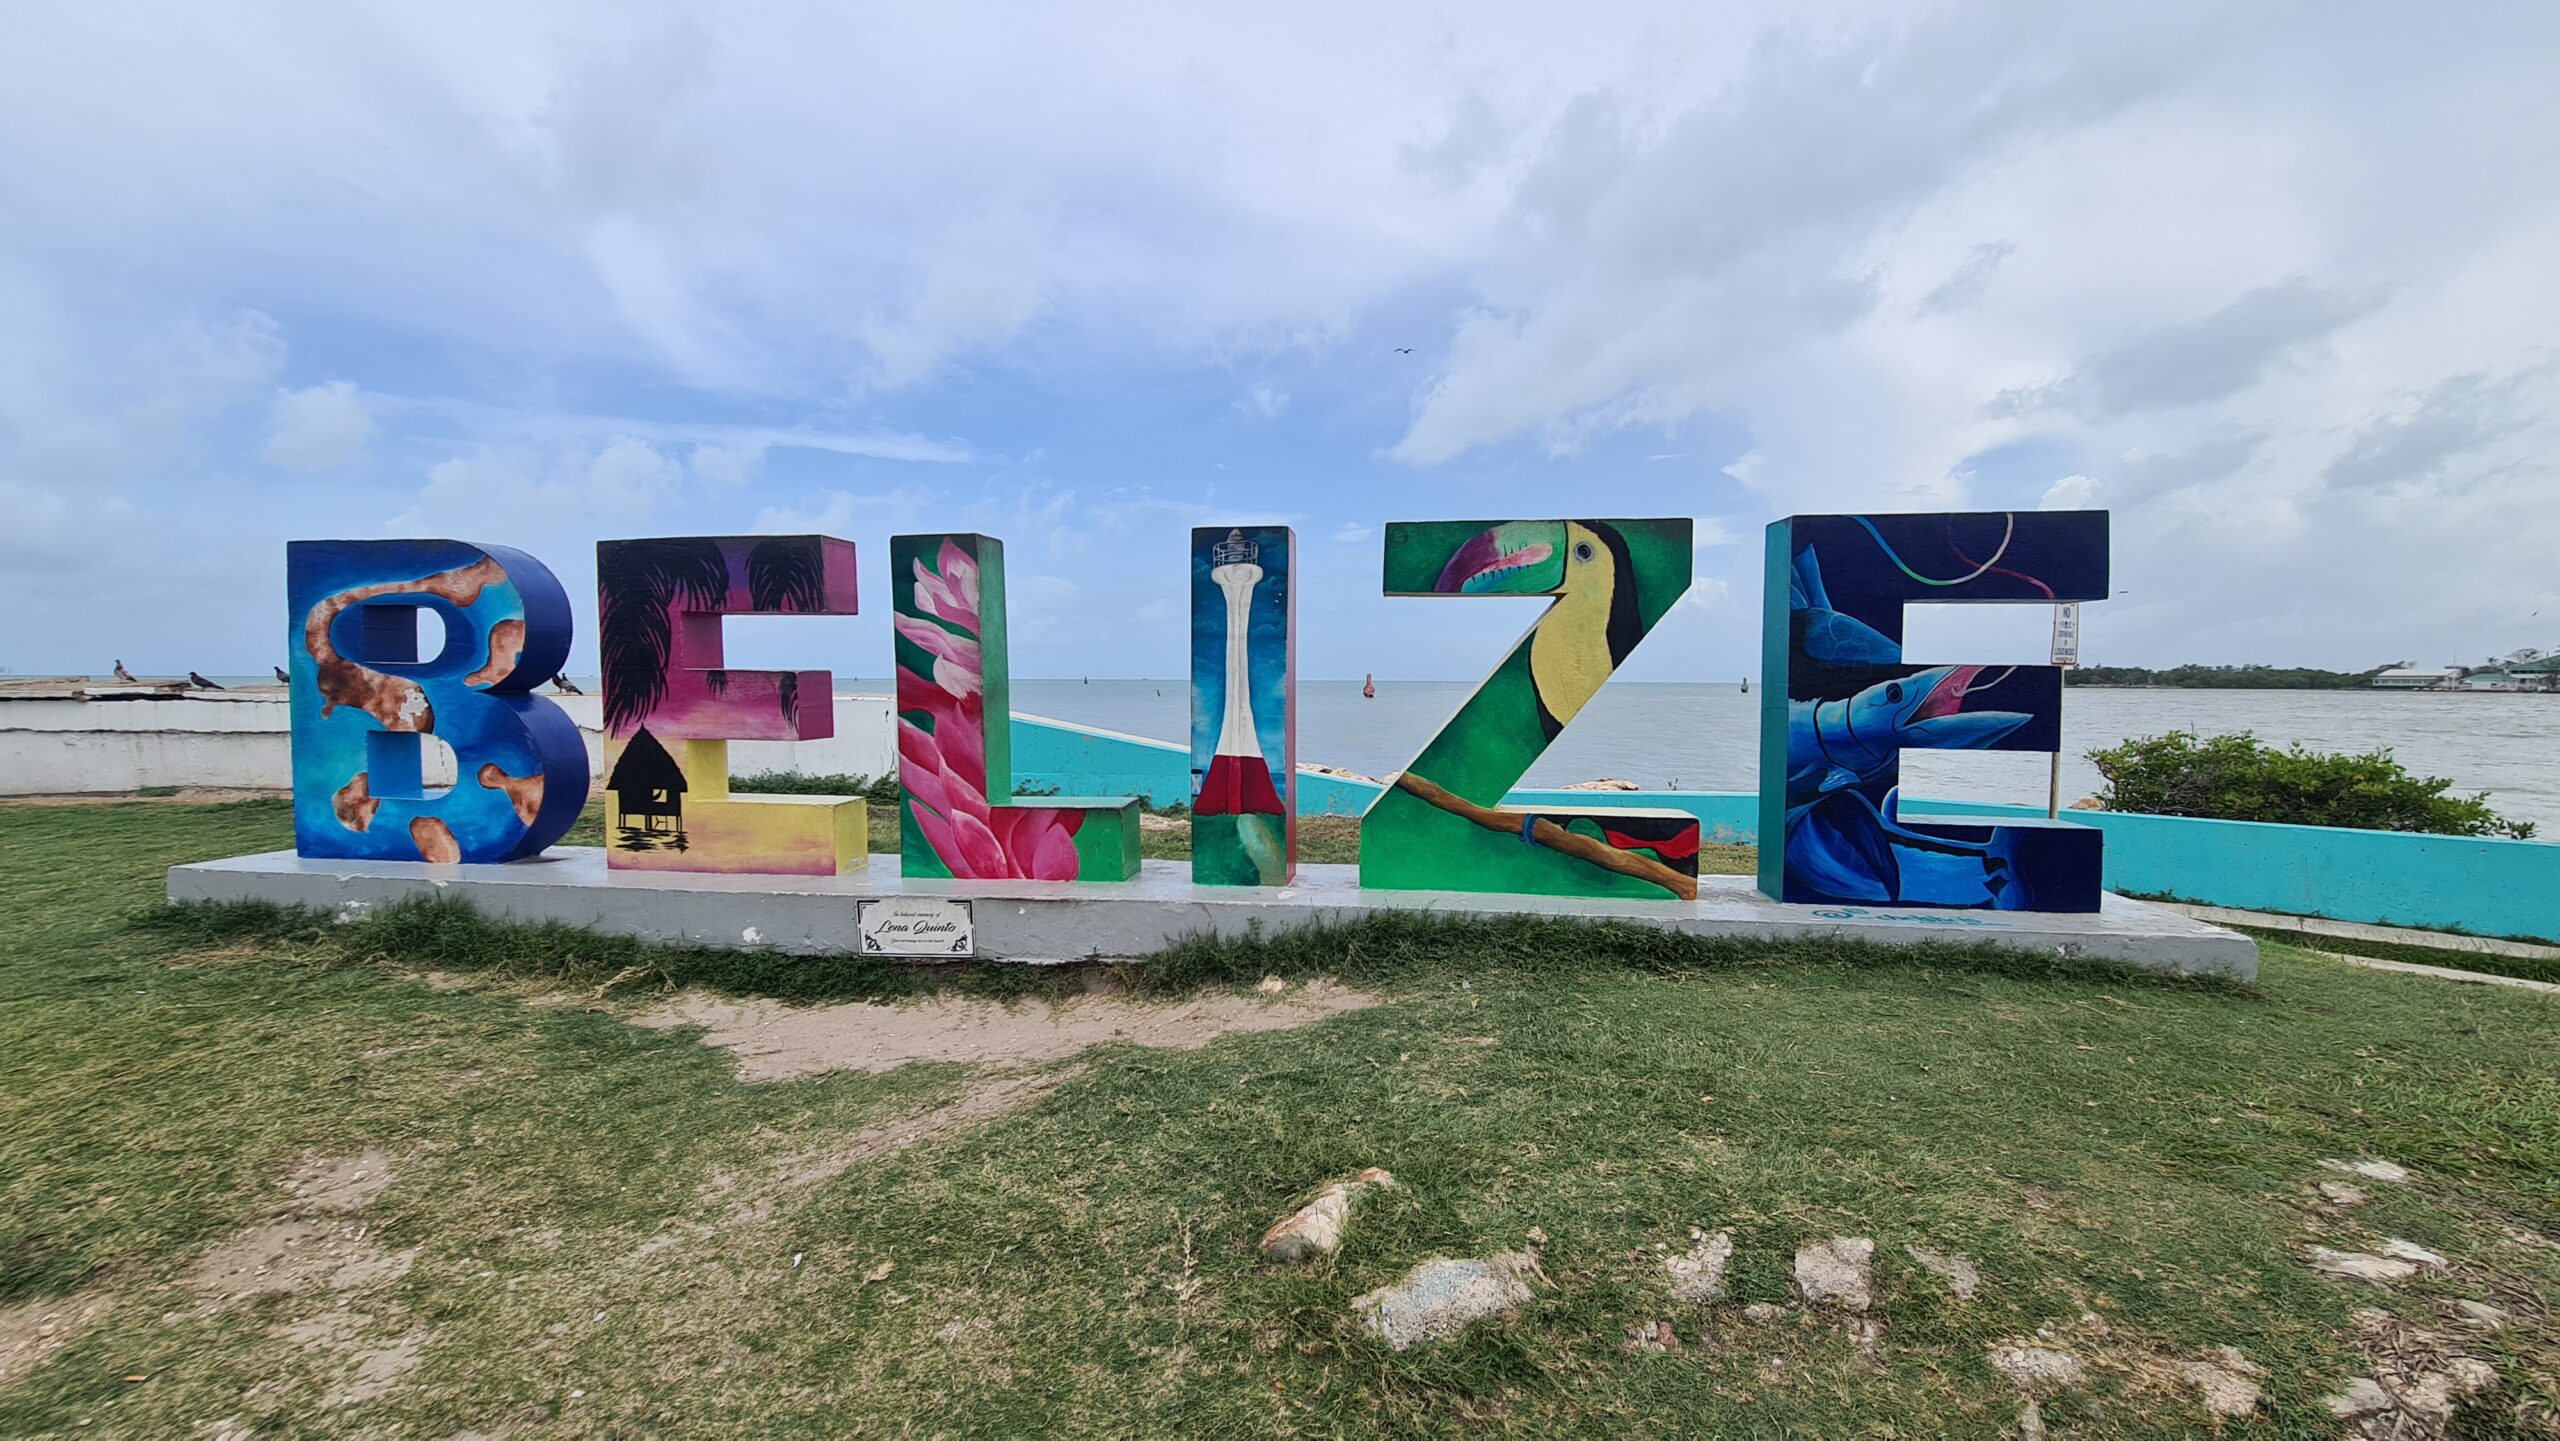 The letters of the word Belize painted over in mural style